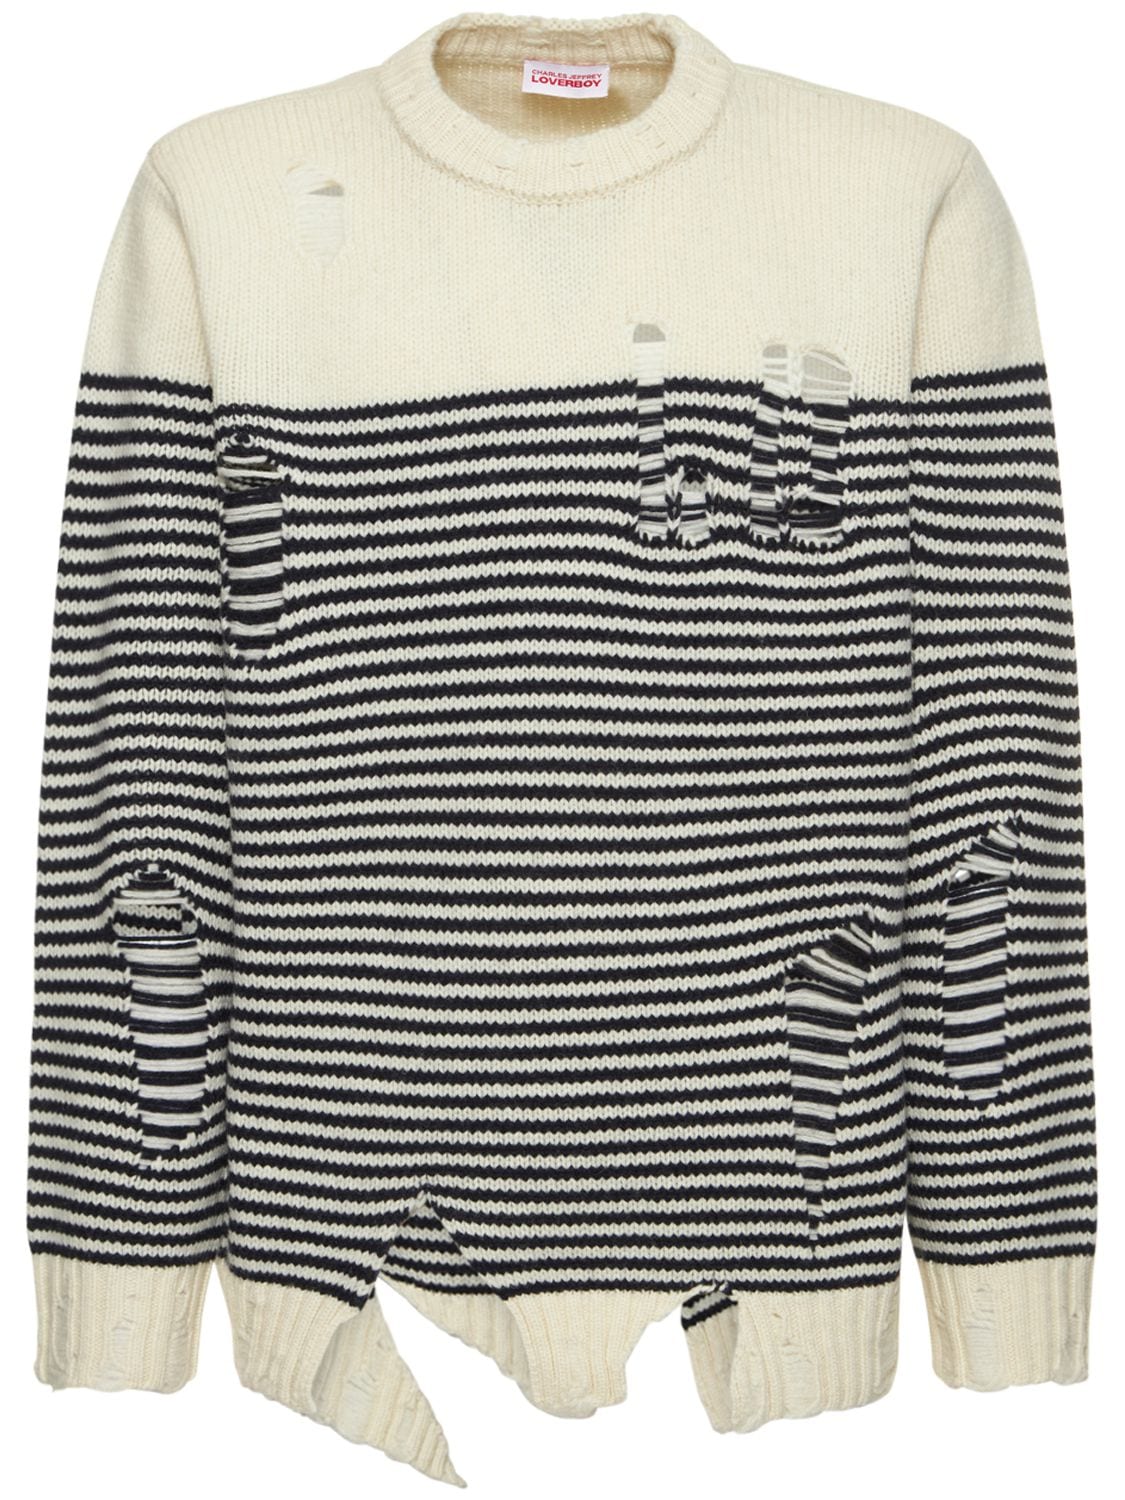 Charles Jeffrey Loverboy White And Blue Distressed Striped Jumper In Neutrals